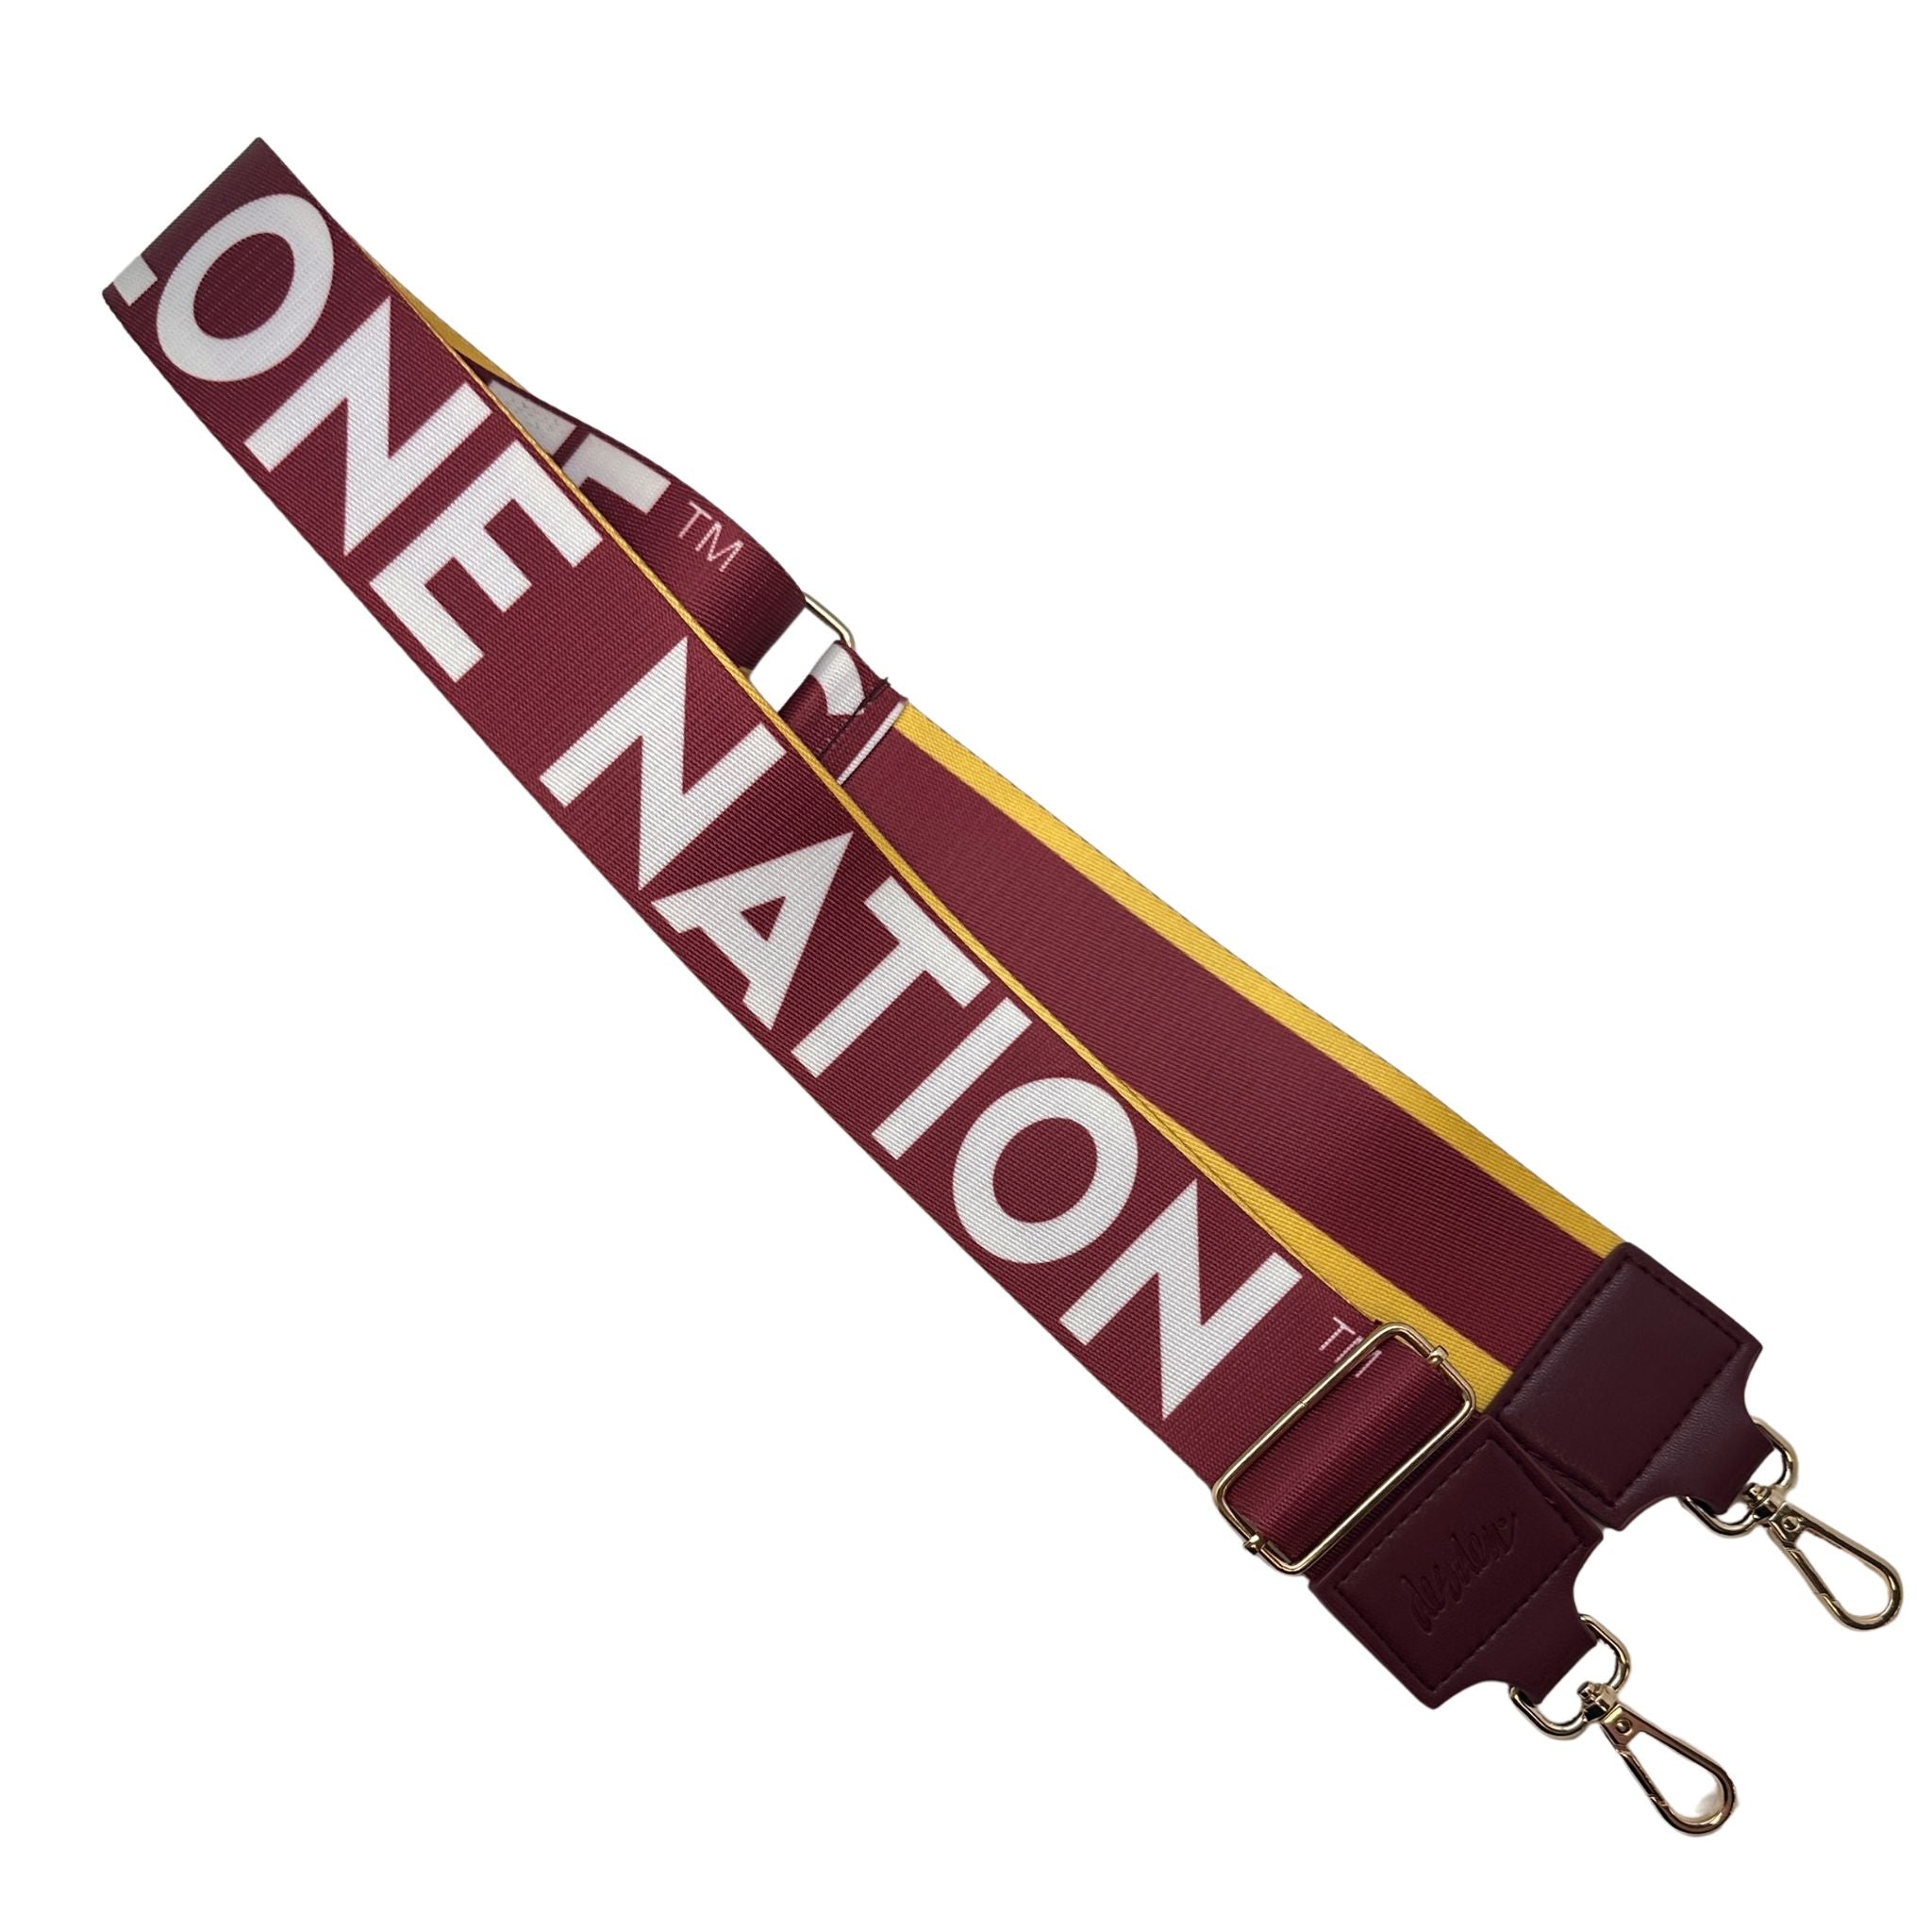 IOWA STATE 2" - Officially Licensed - Stripe